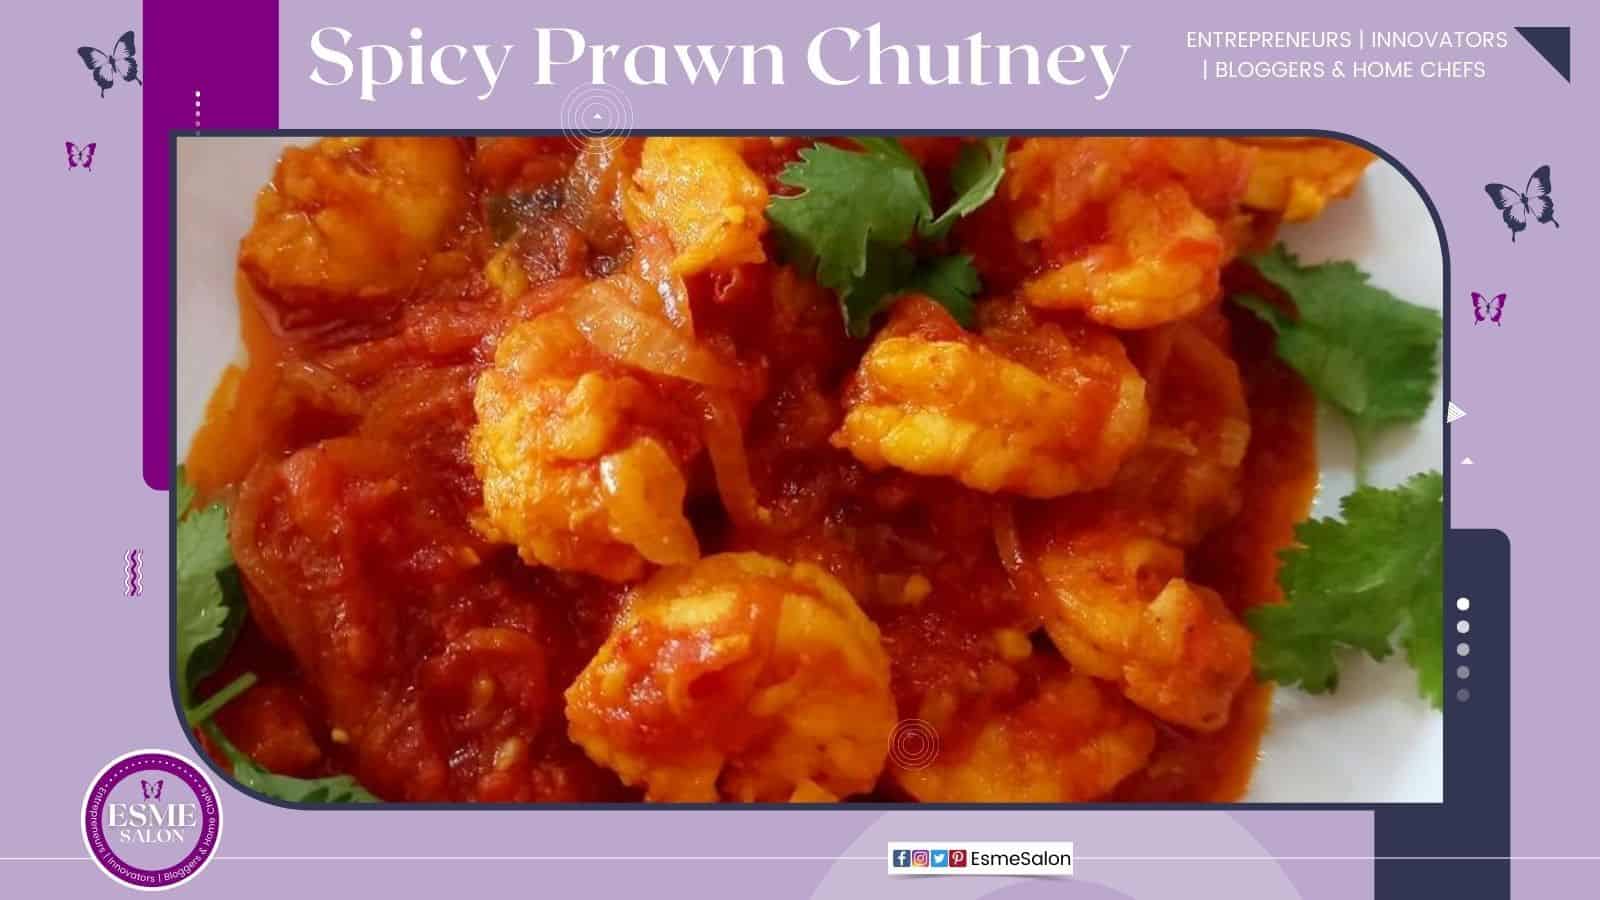 An image of platter filled with Spicy Prawn Chutney